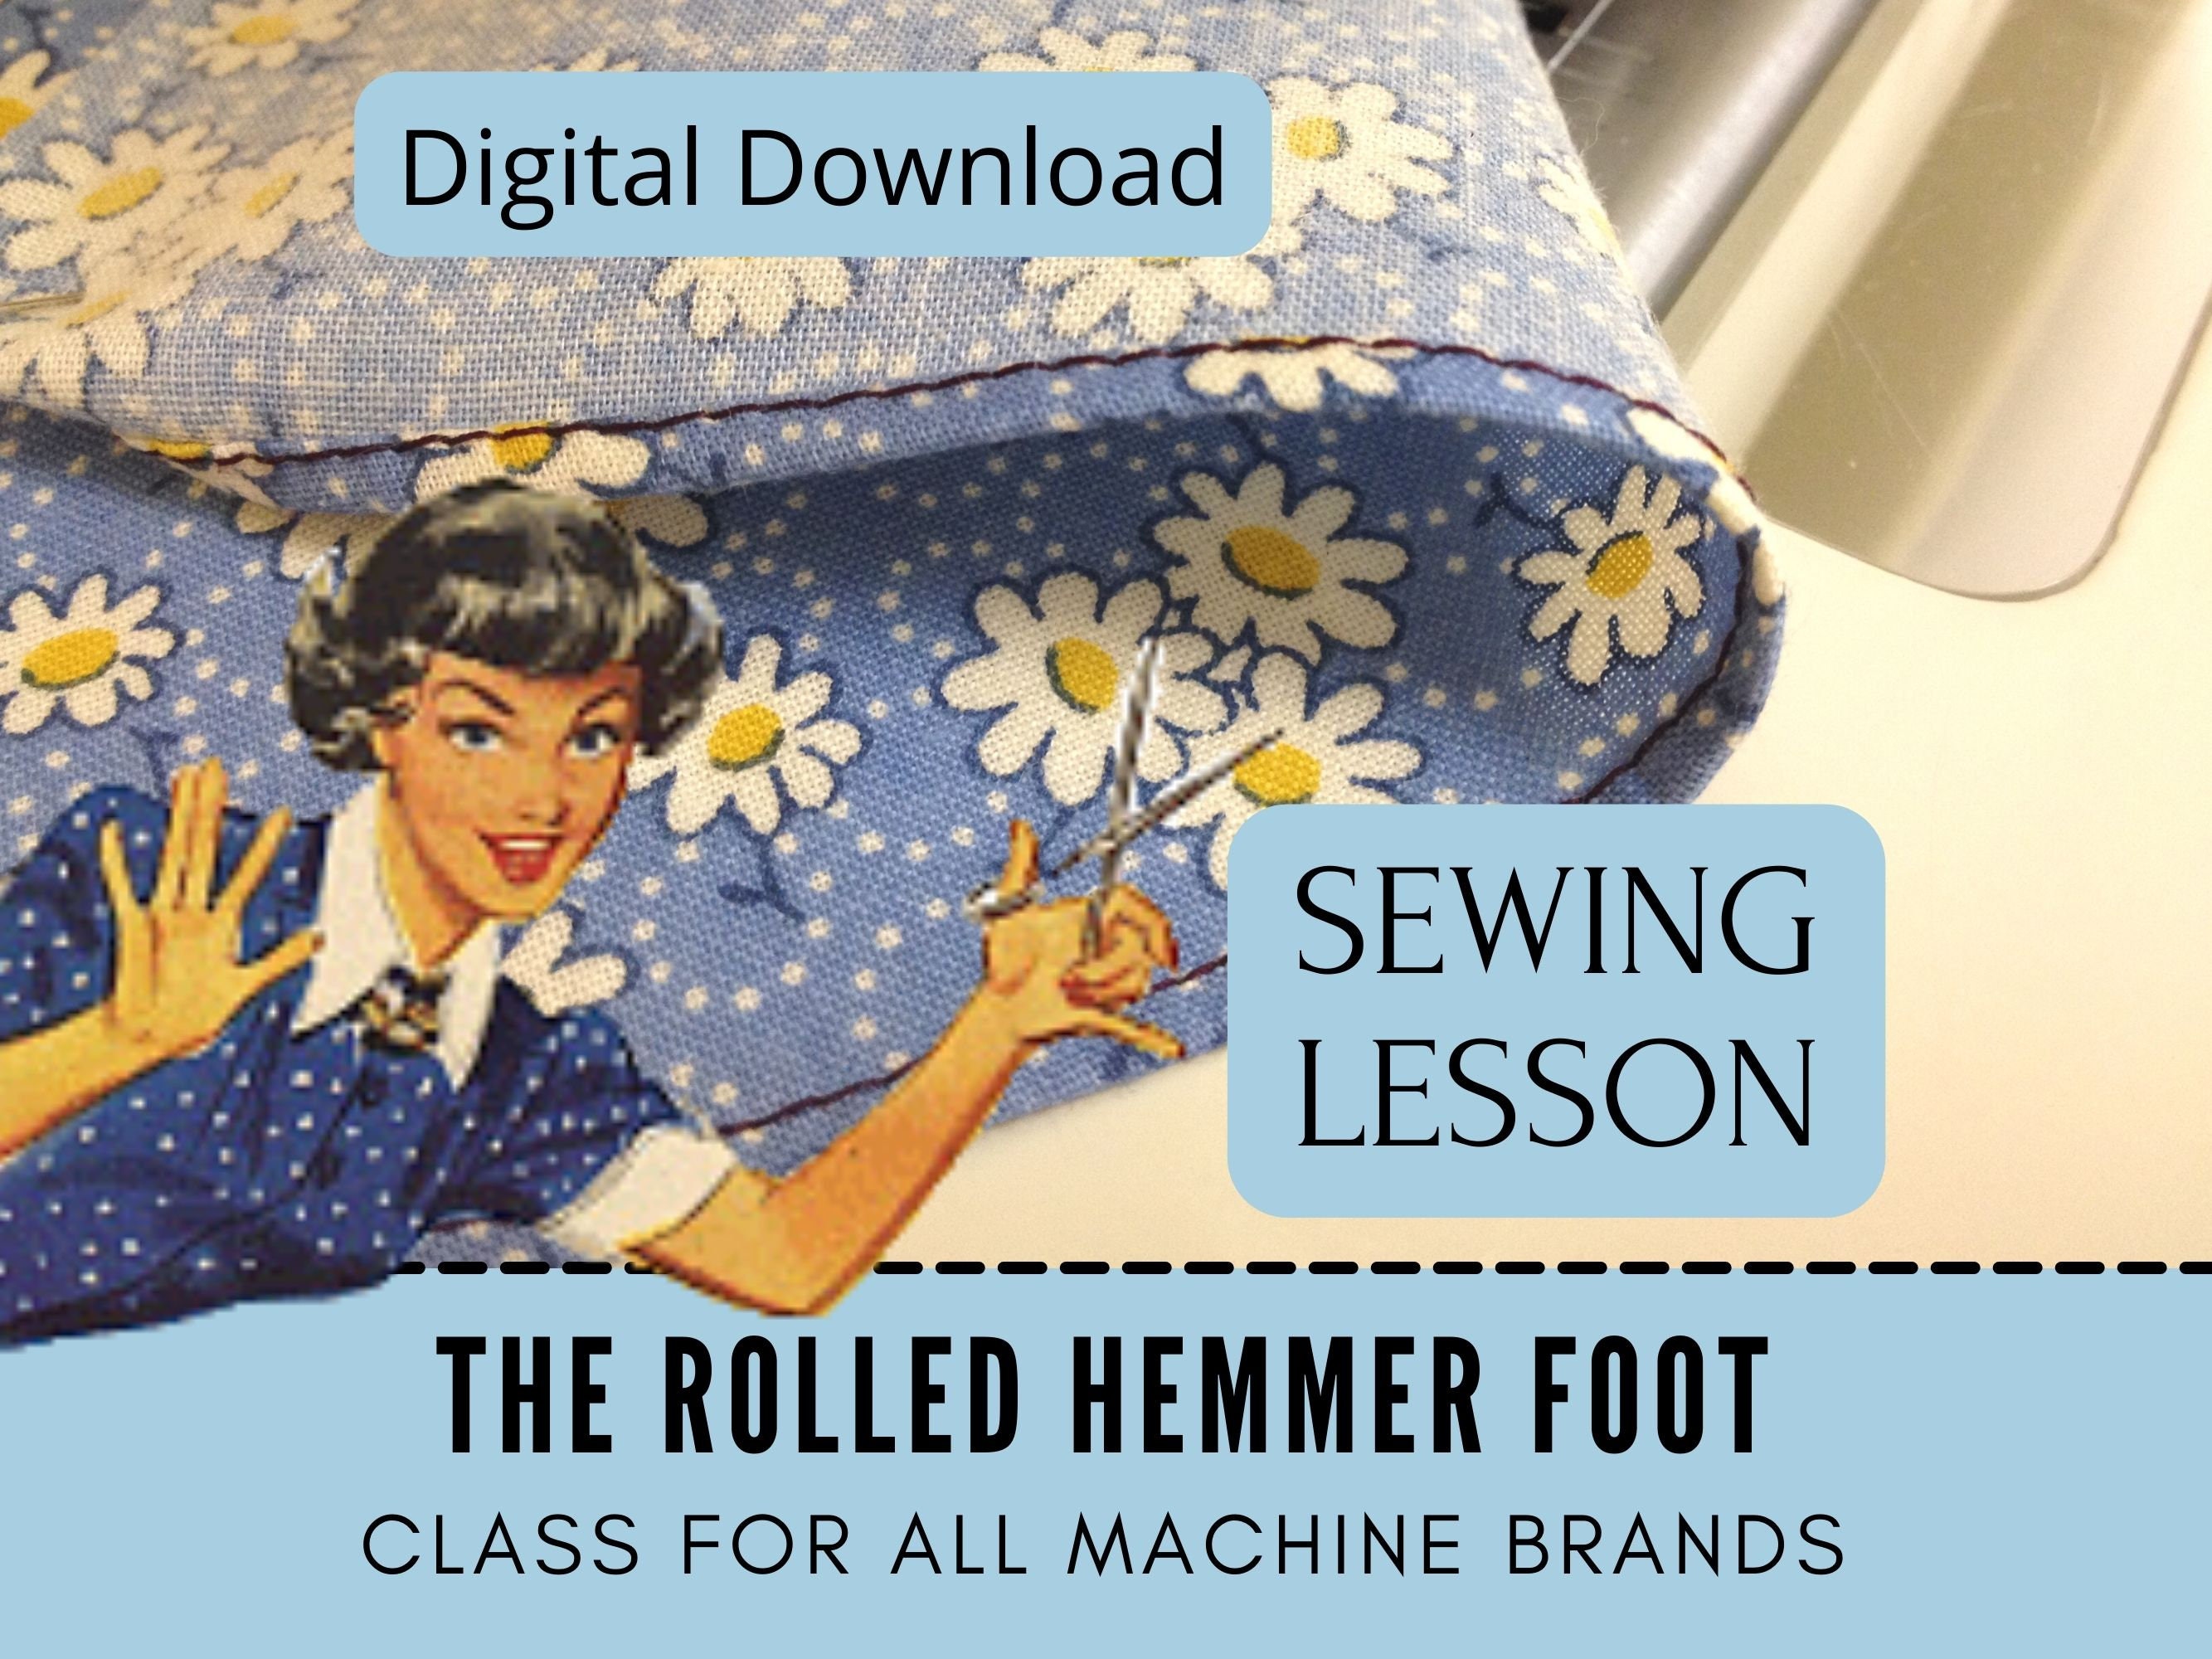 Sewing Lesson for Beginner, Narrow Rolled Hemmer Foot, Learn to Sew,  Dressmaking Tutorial, Video to Sew Clothing, Notion, Machine Attachment 